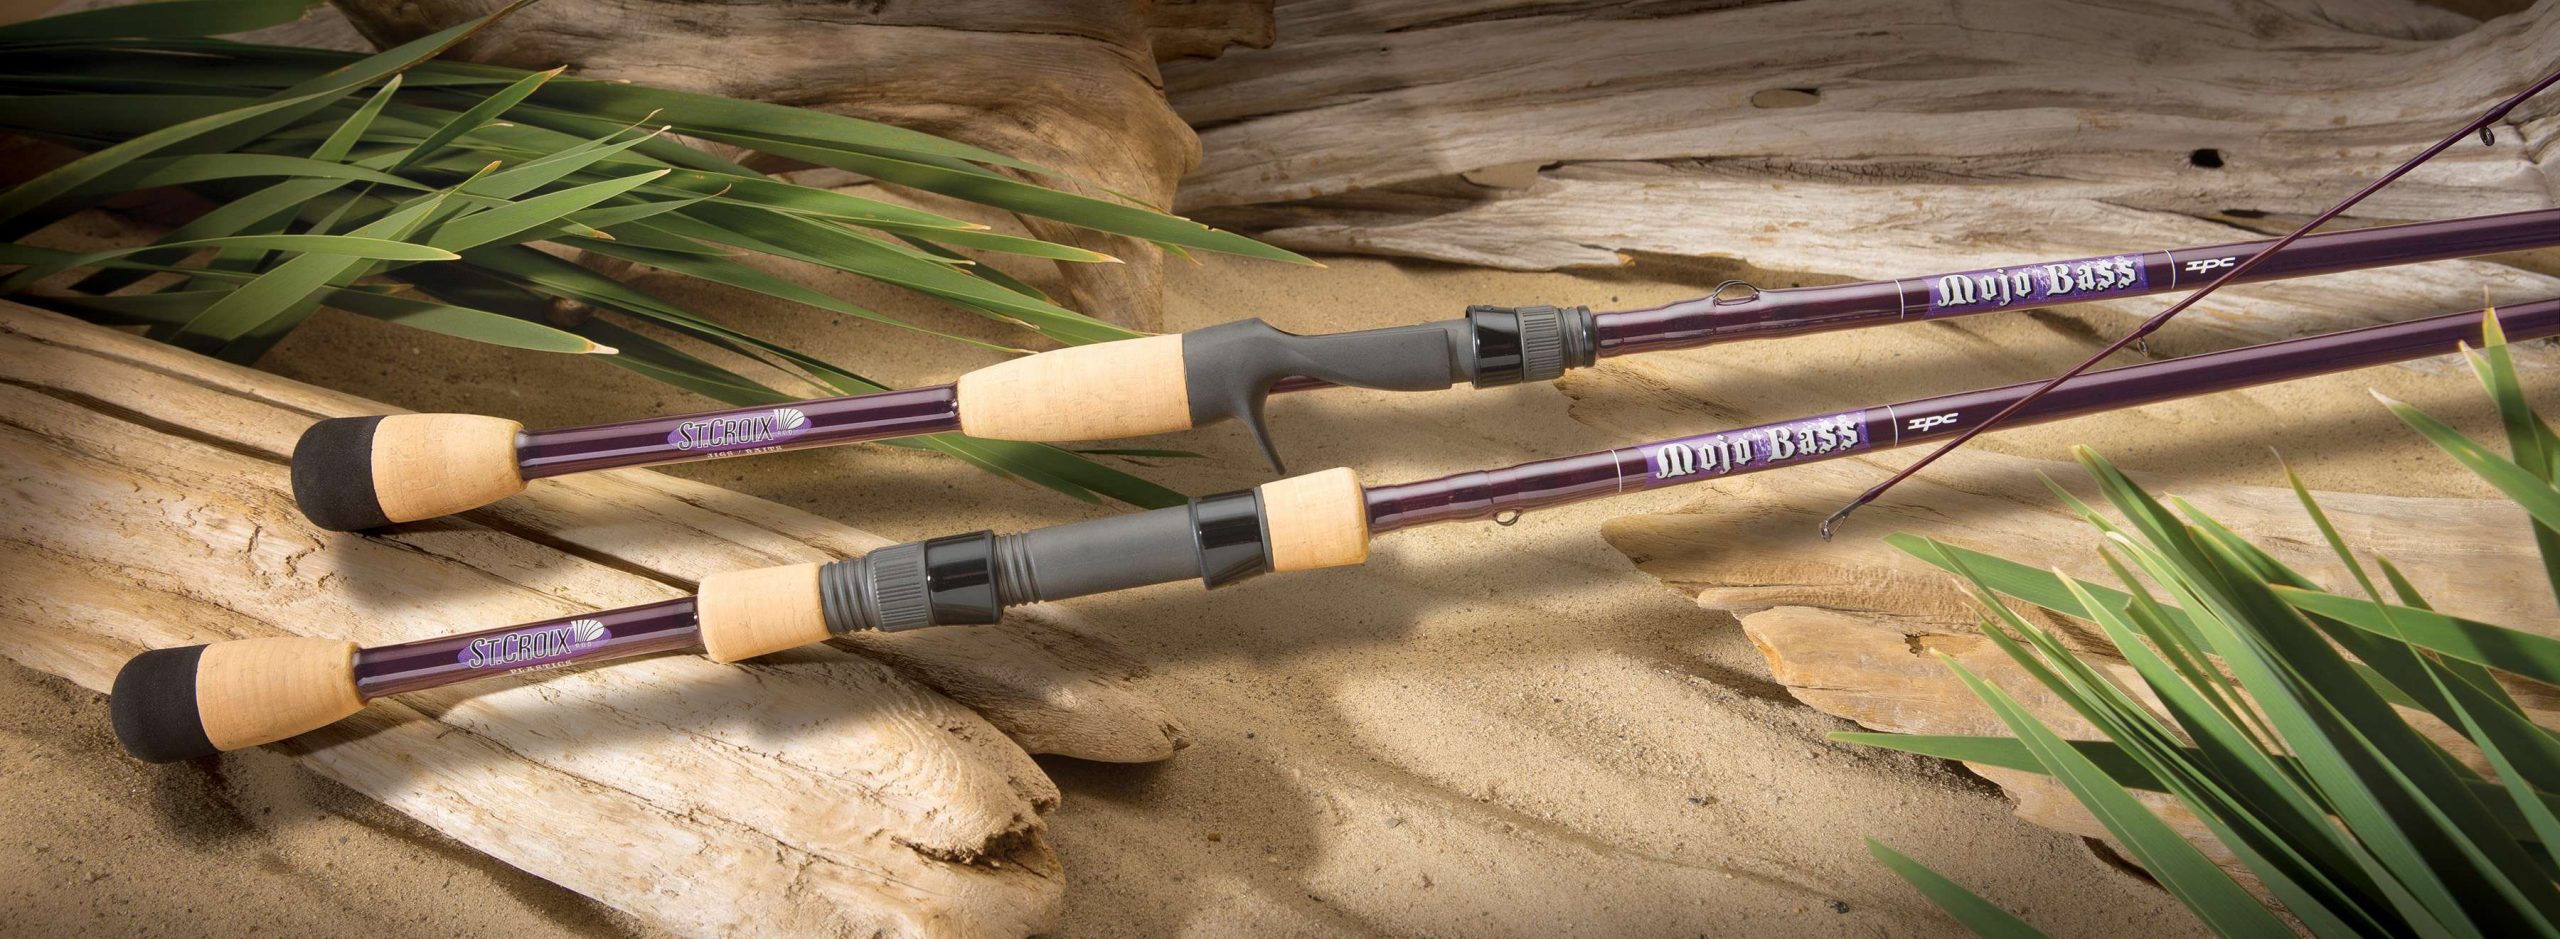 <b>St. Croix Mojo Bass Rods:</b> Now featuring SCIII graphite and IPC tooling technology, the newly redesigned St. Croix Mojo bass rods are more balanced and sensitive than ever before, not to mention up to 15 percent lighter. Decked out in a new formulation of the ever-popular Black Cherry Metallic finish, these are the reward for the devoted bass-fishing fanatics. There are 13 casting models and four spinning rods in the Mojo lineup. $120-$140; <a href=